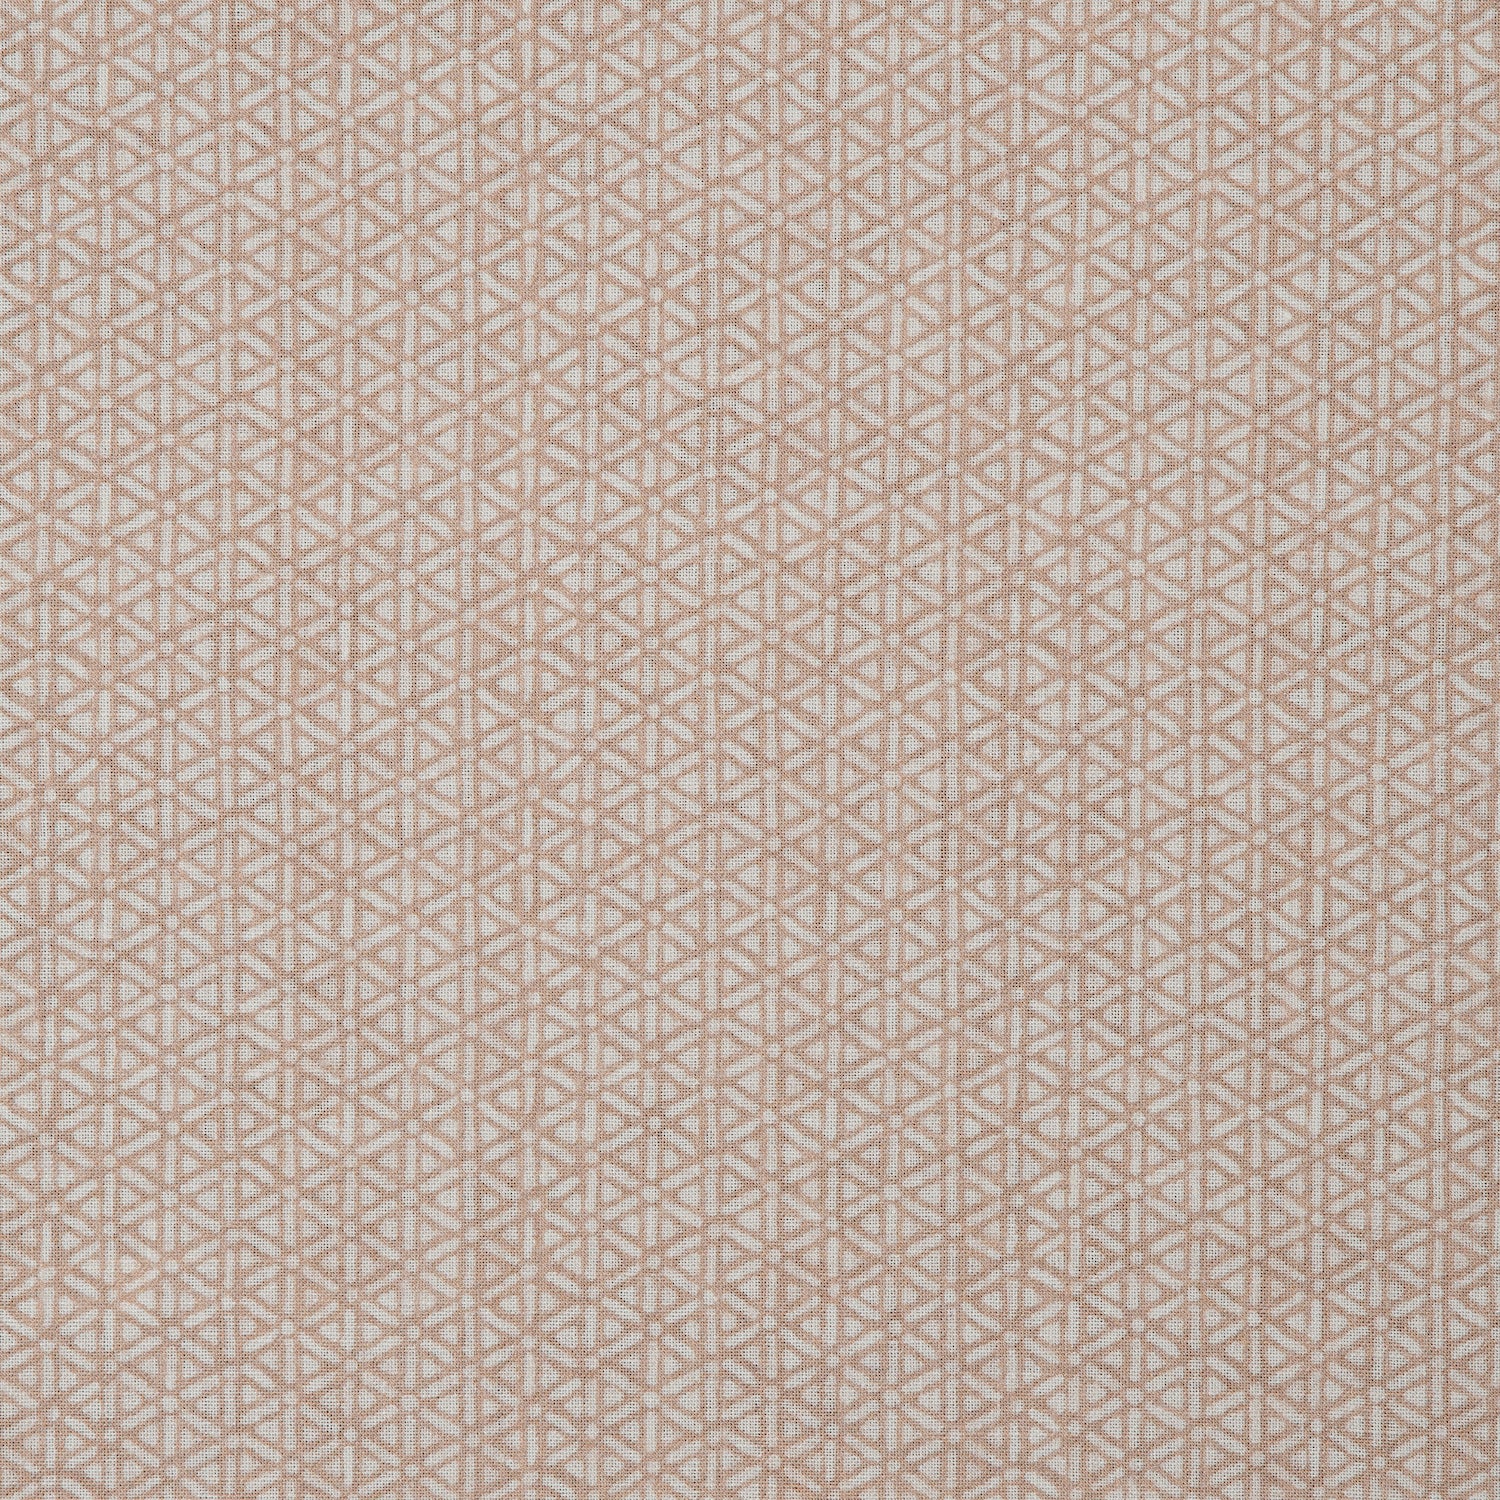 Detail of a linen fabric in a detailed geometric pattern in white on a light pink field.